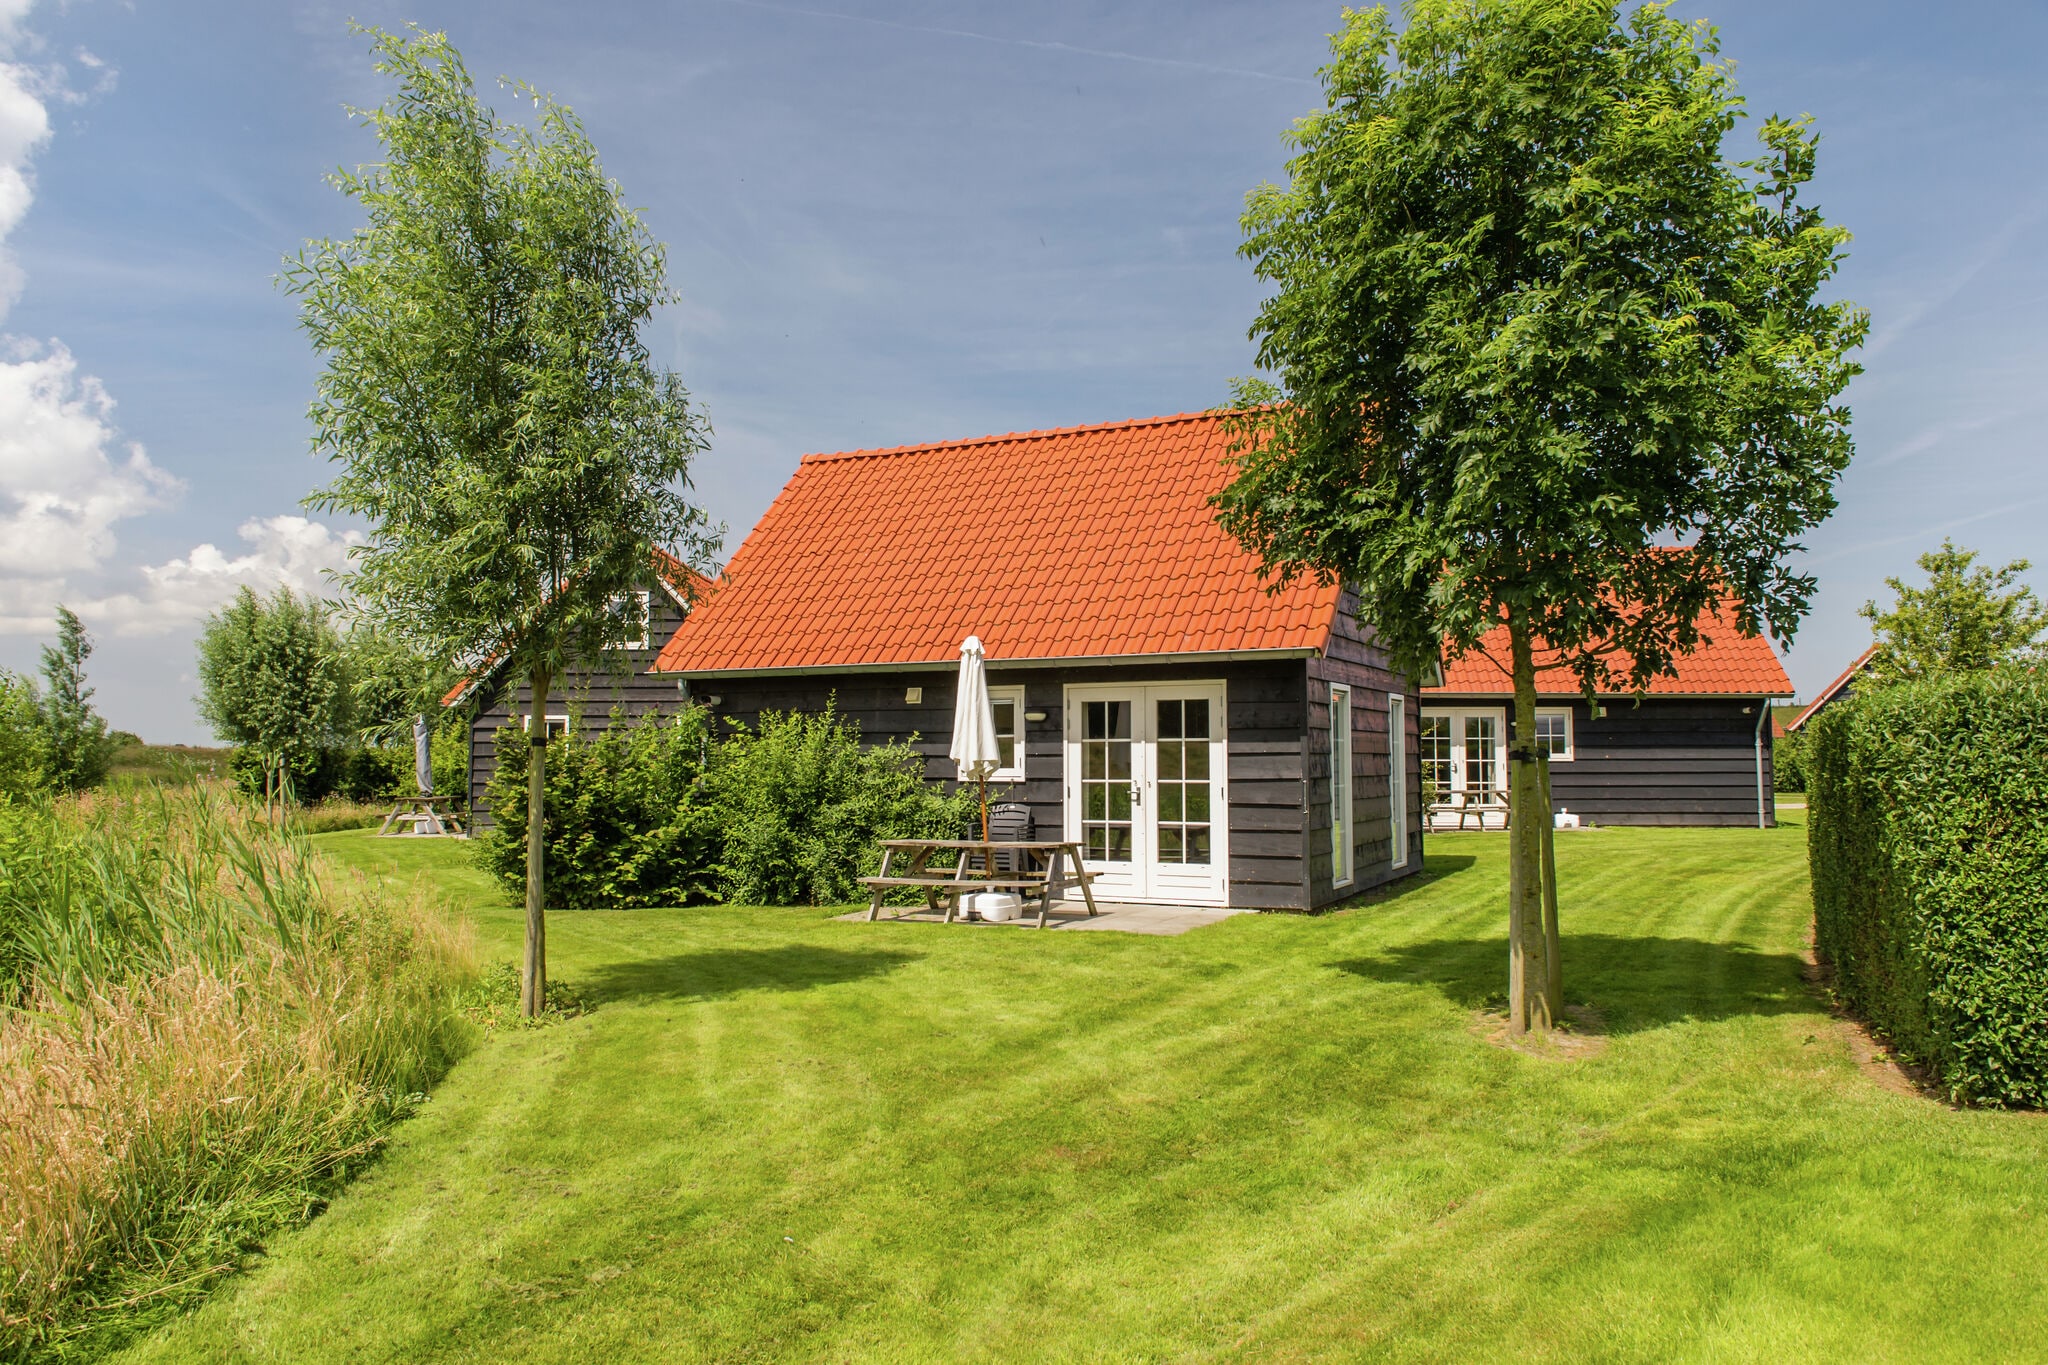 Holiday home with three bedrooms, in Zeeland